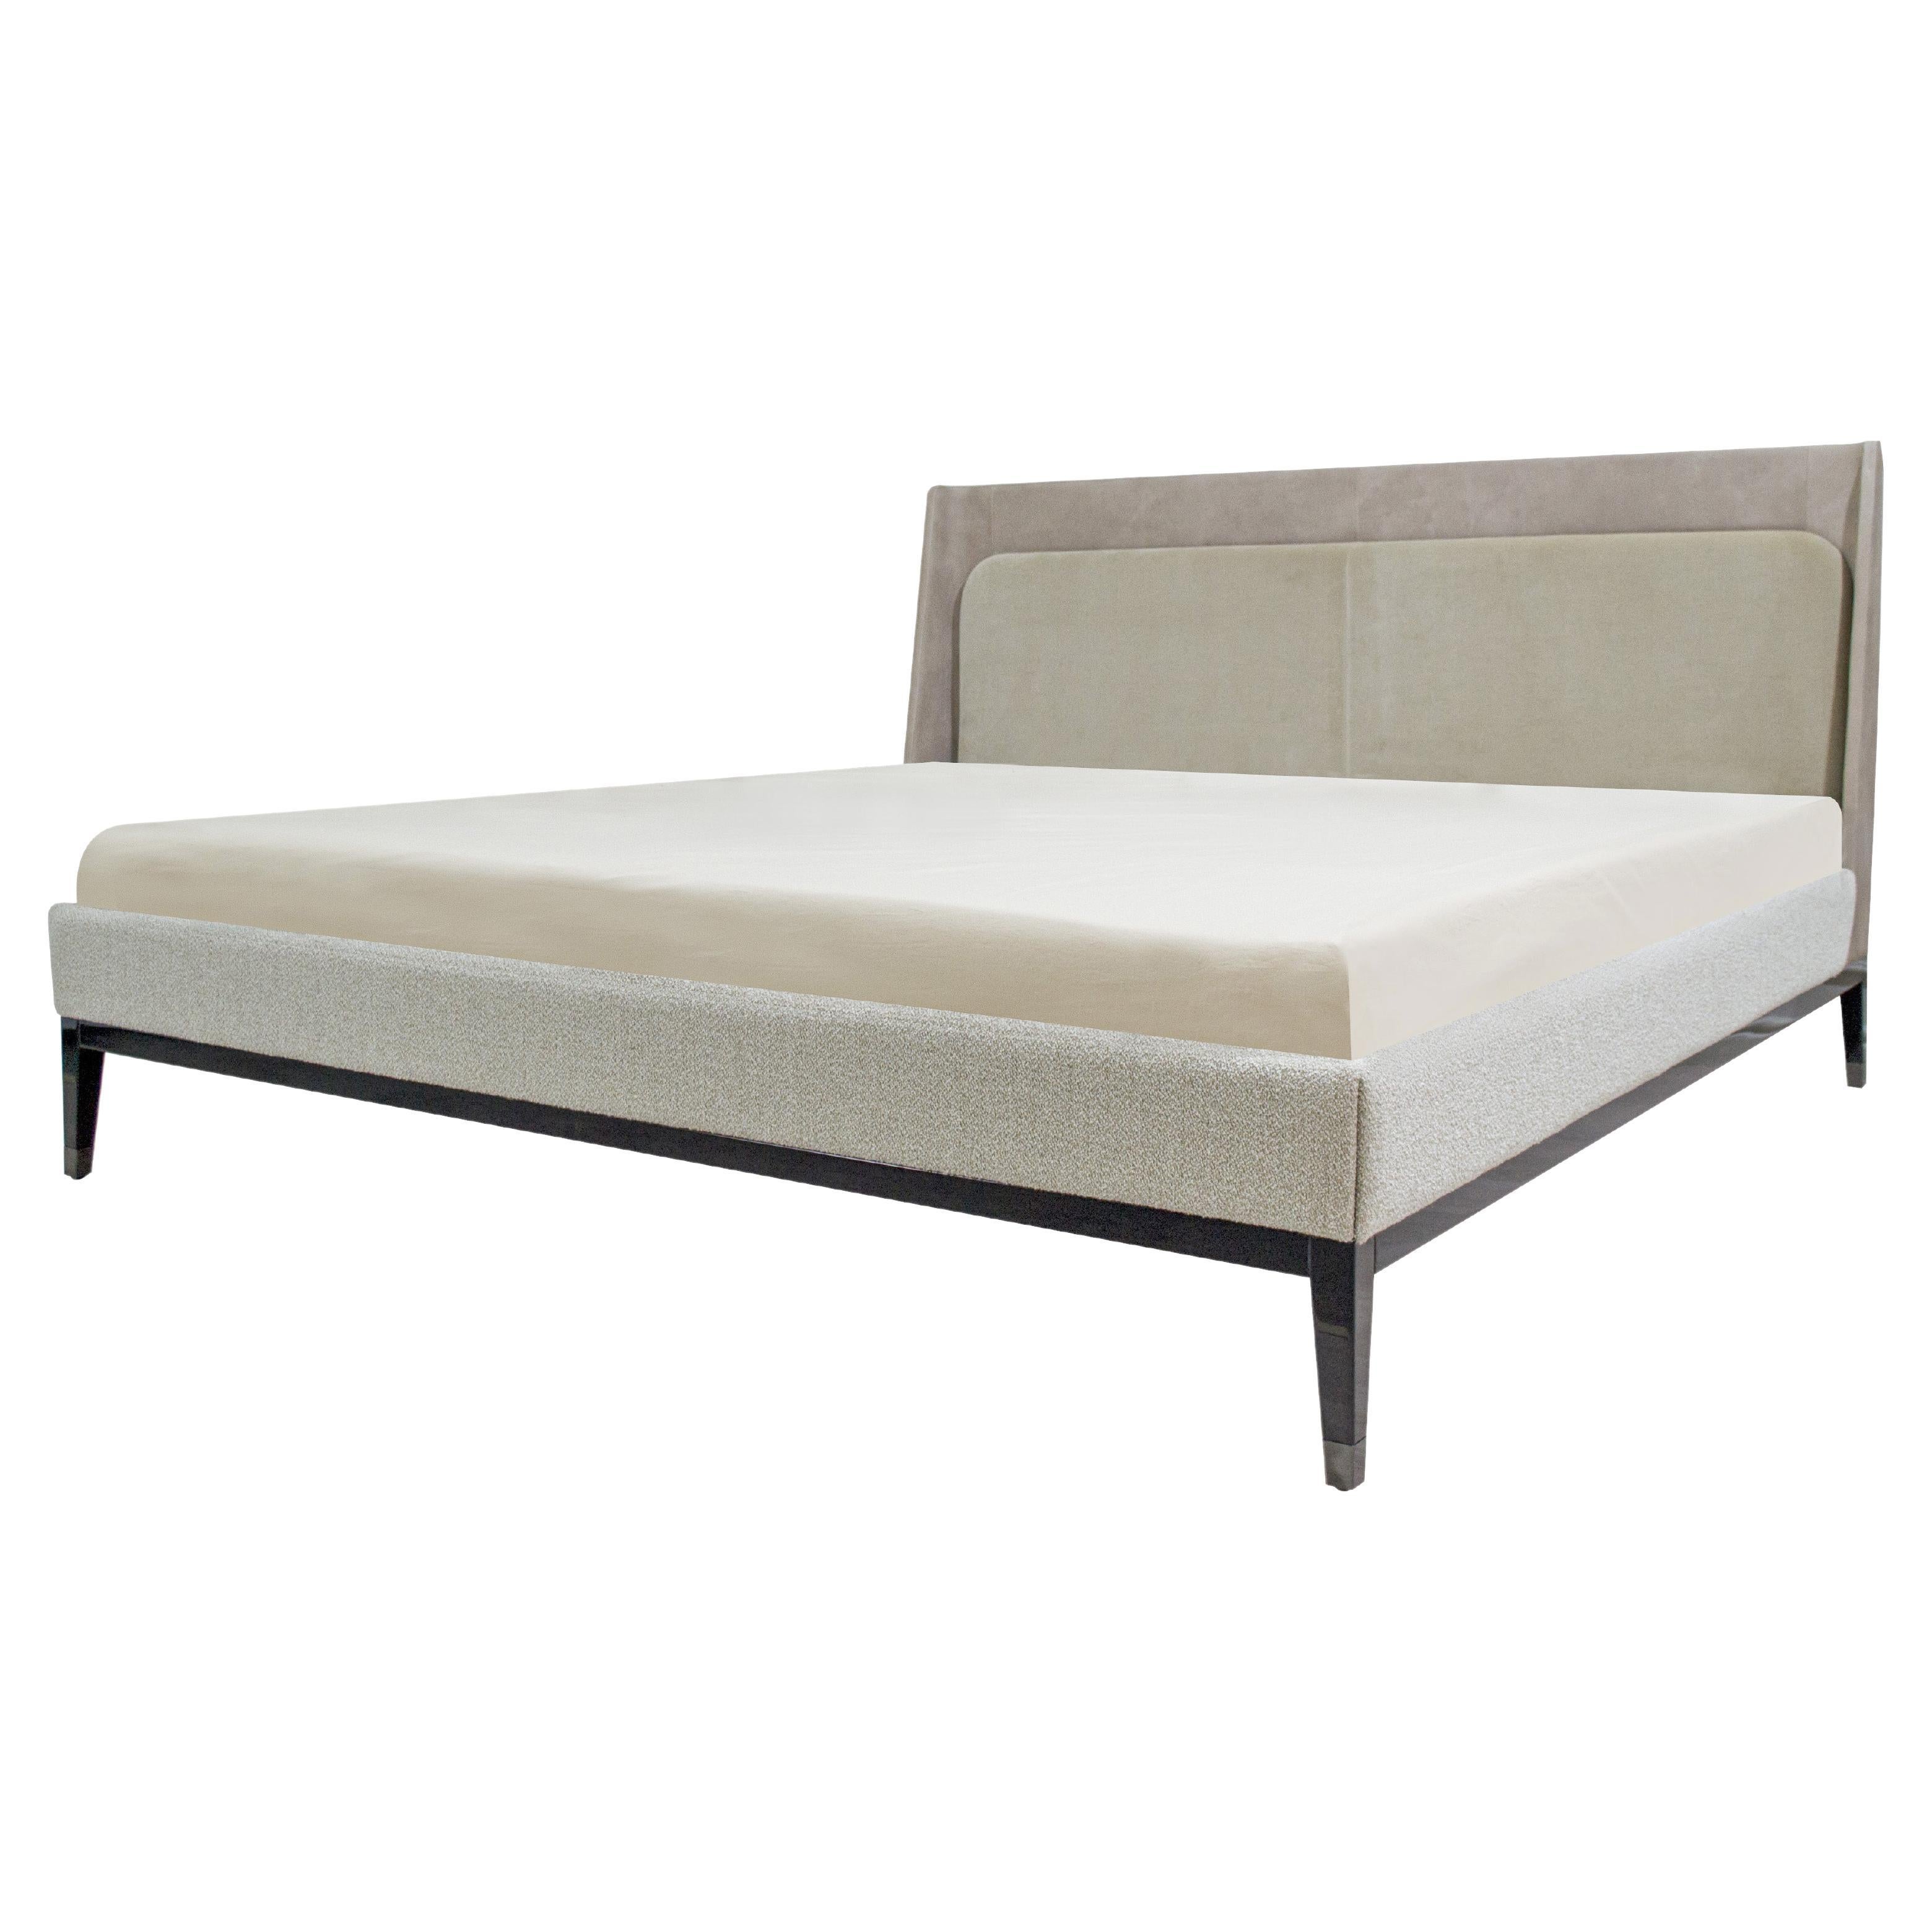 Italian Bed Upholstered in Nubuck and Quinoa Boucle Fabric with Wooden Legs For Sale